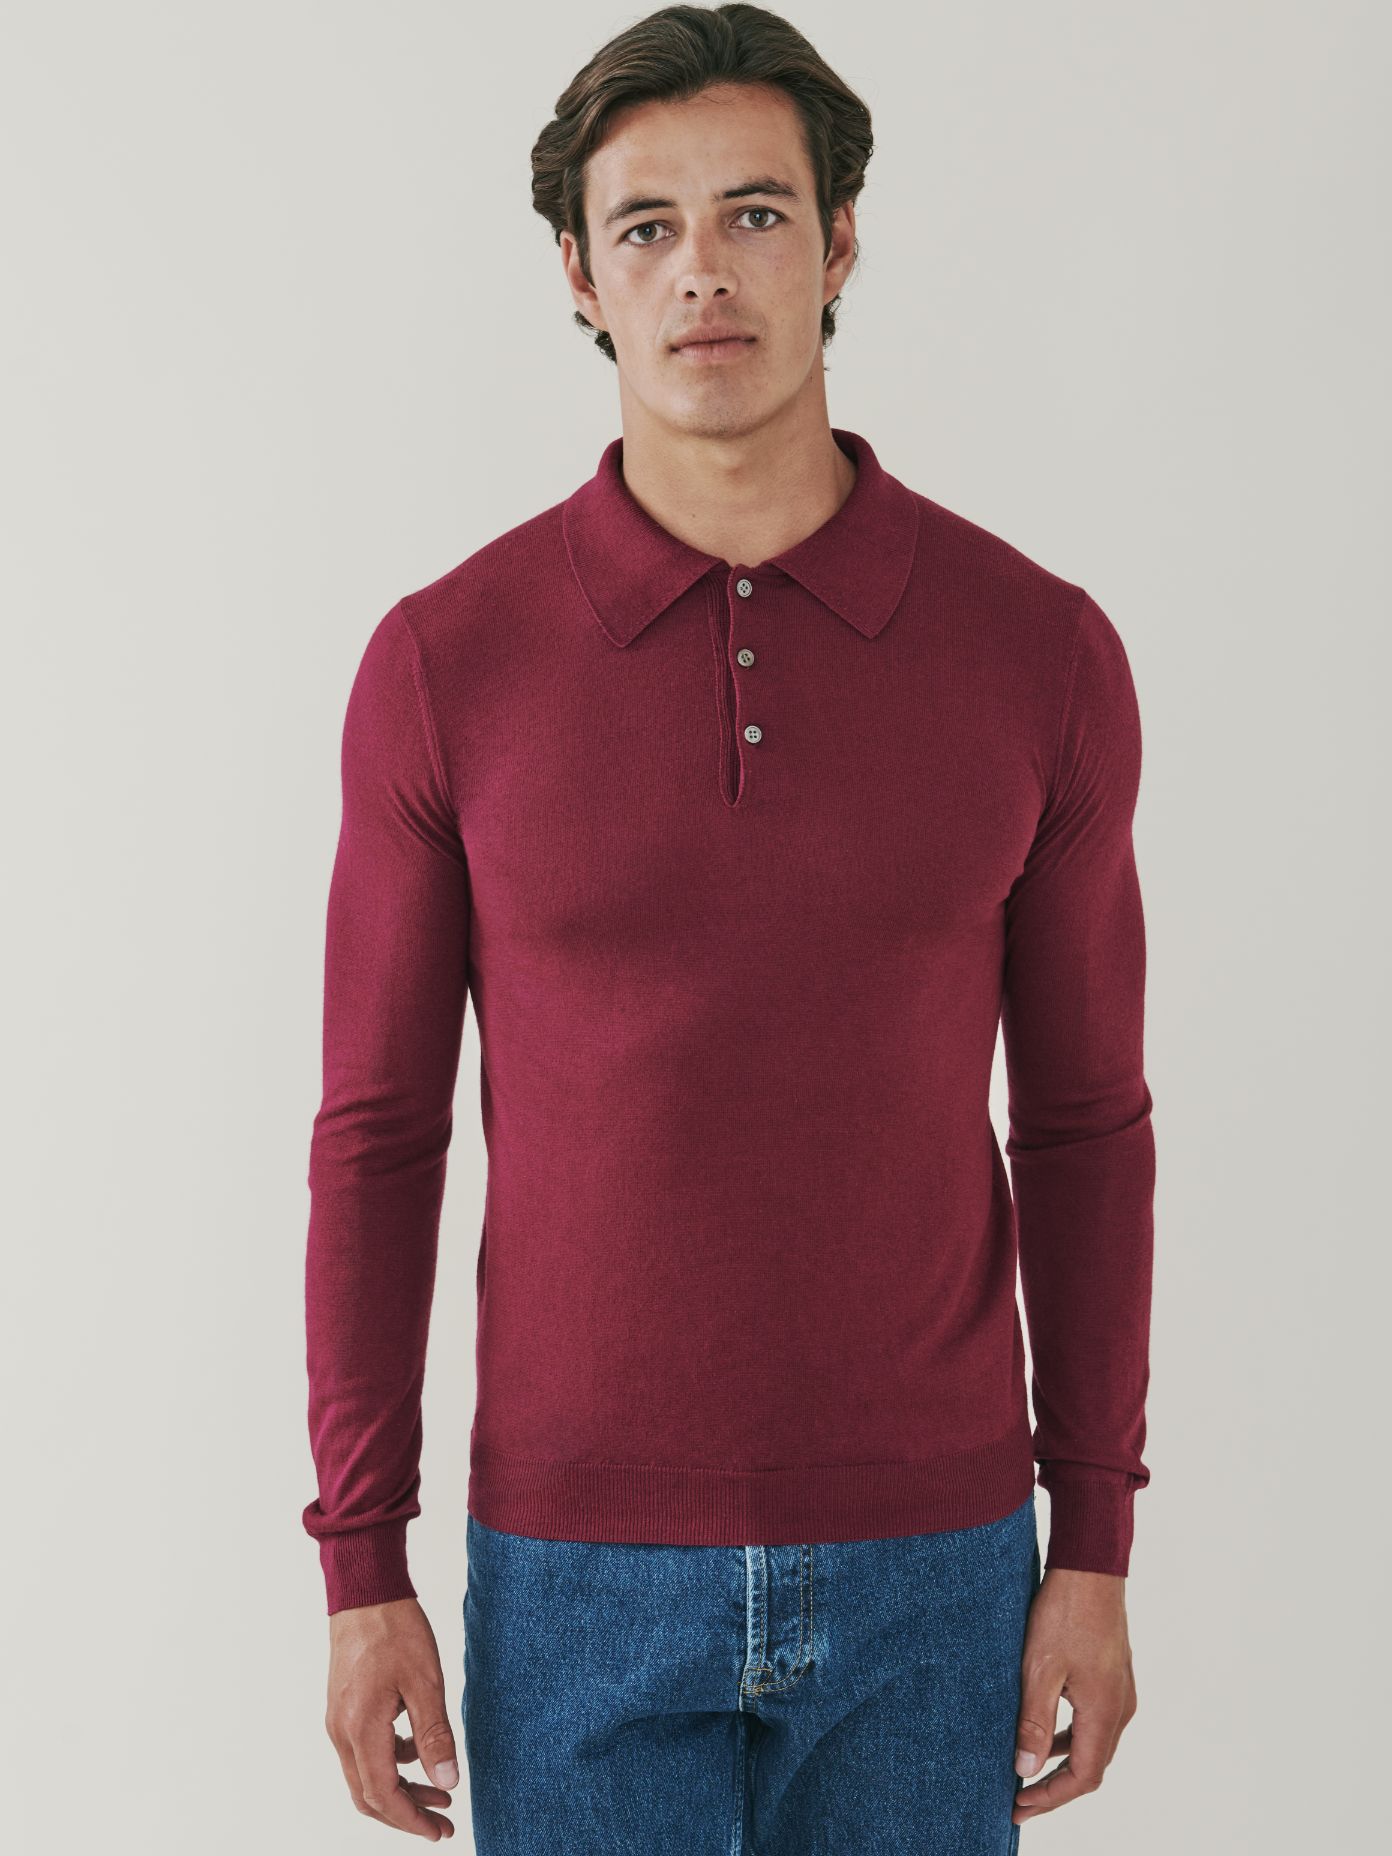 Mens Cashmere and Silk Blend luxury long sleeve polo shirt